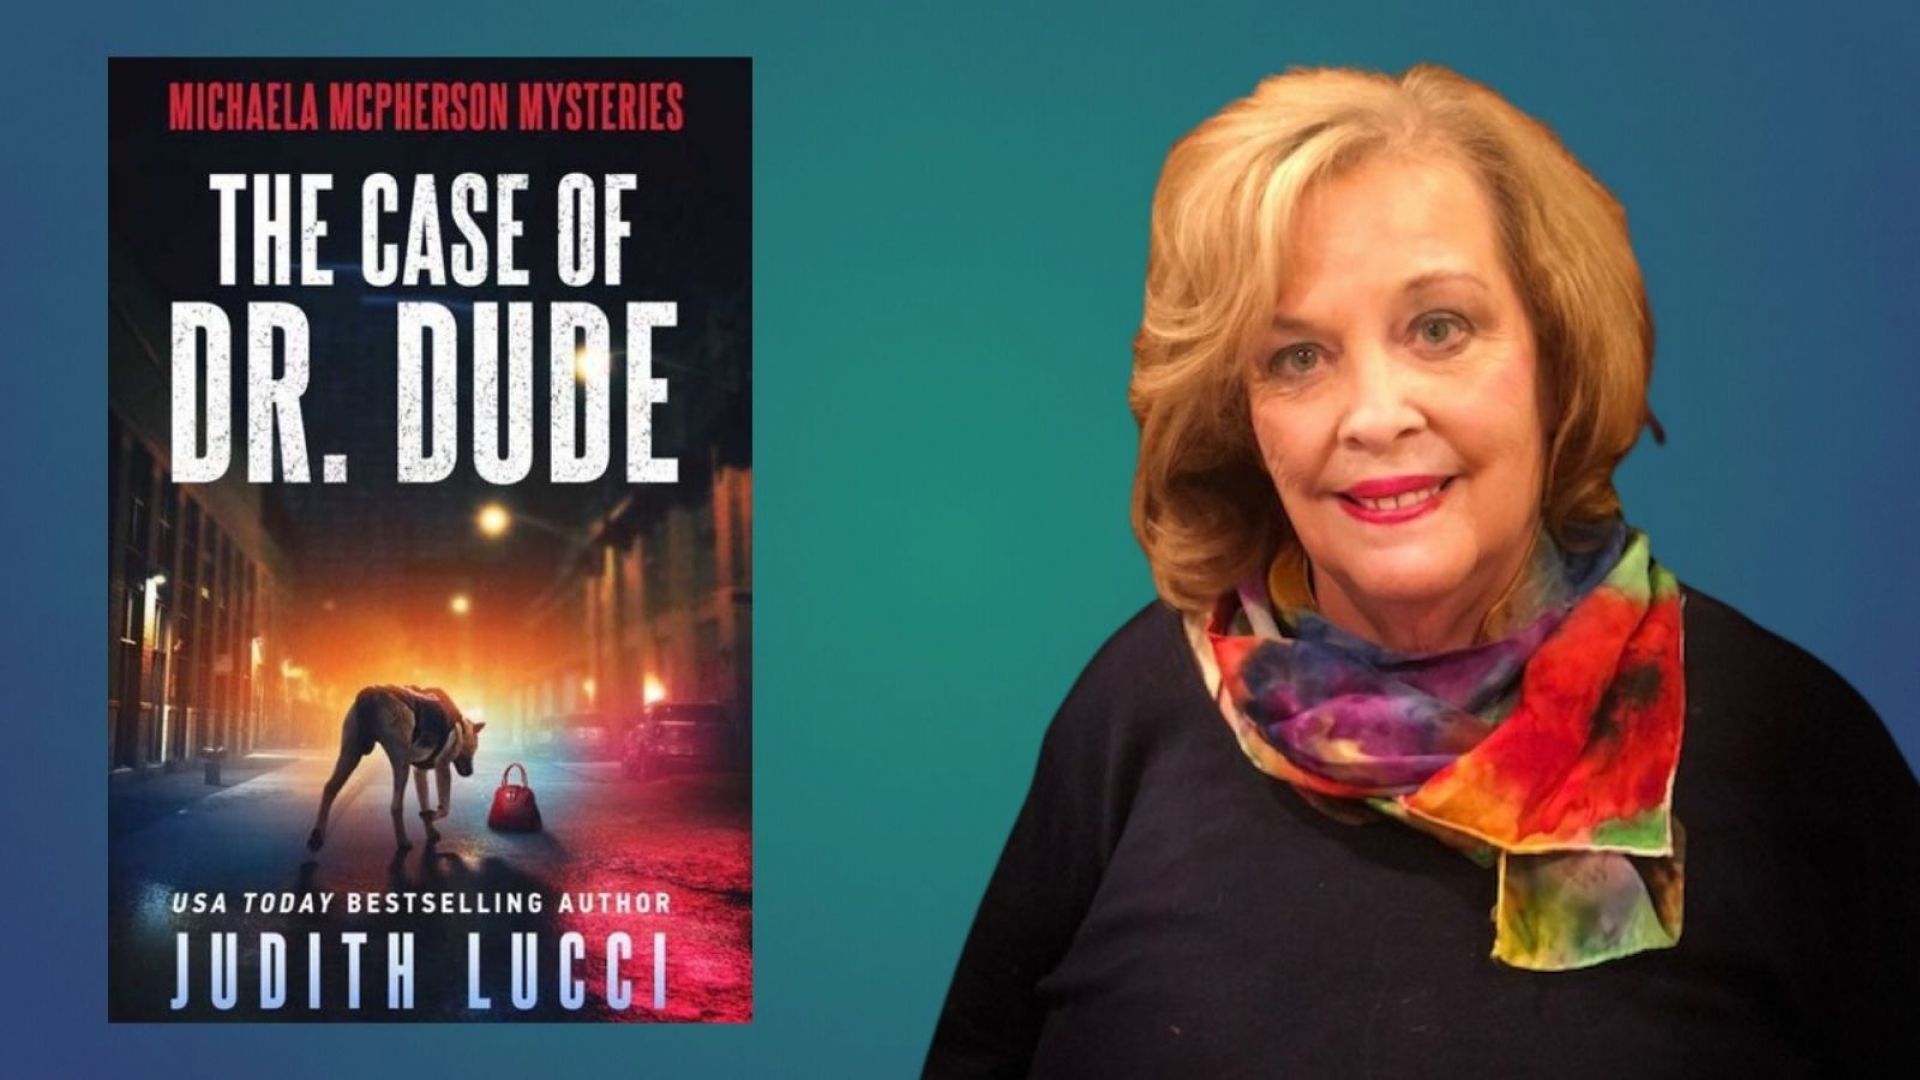 Judith Lucci and her new book